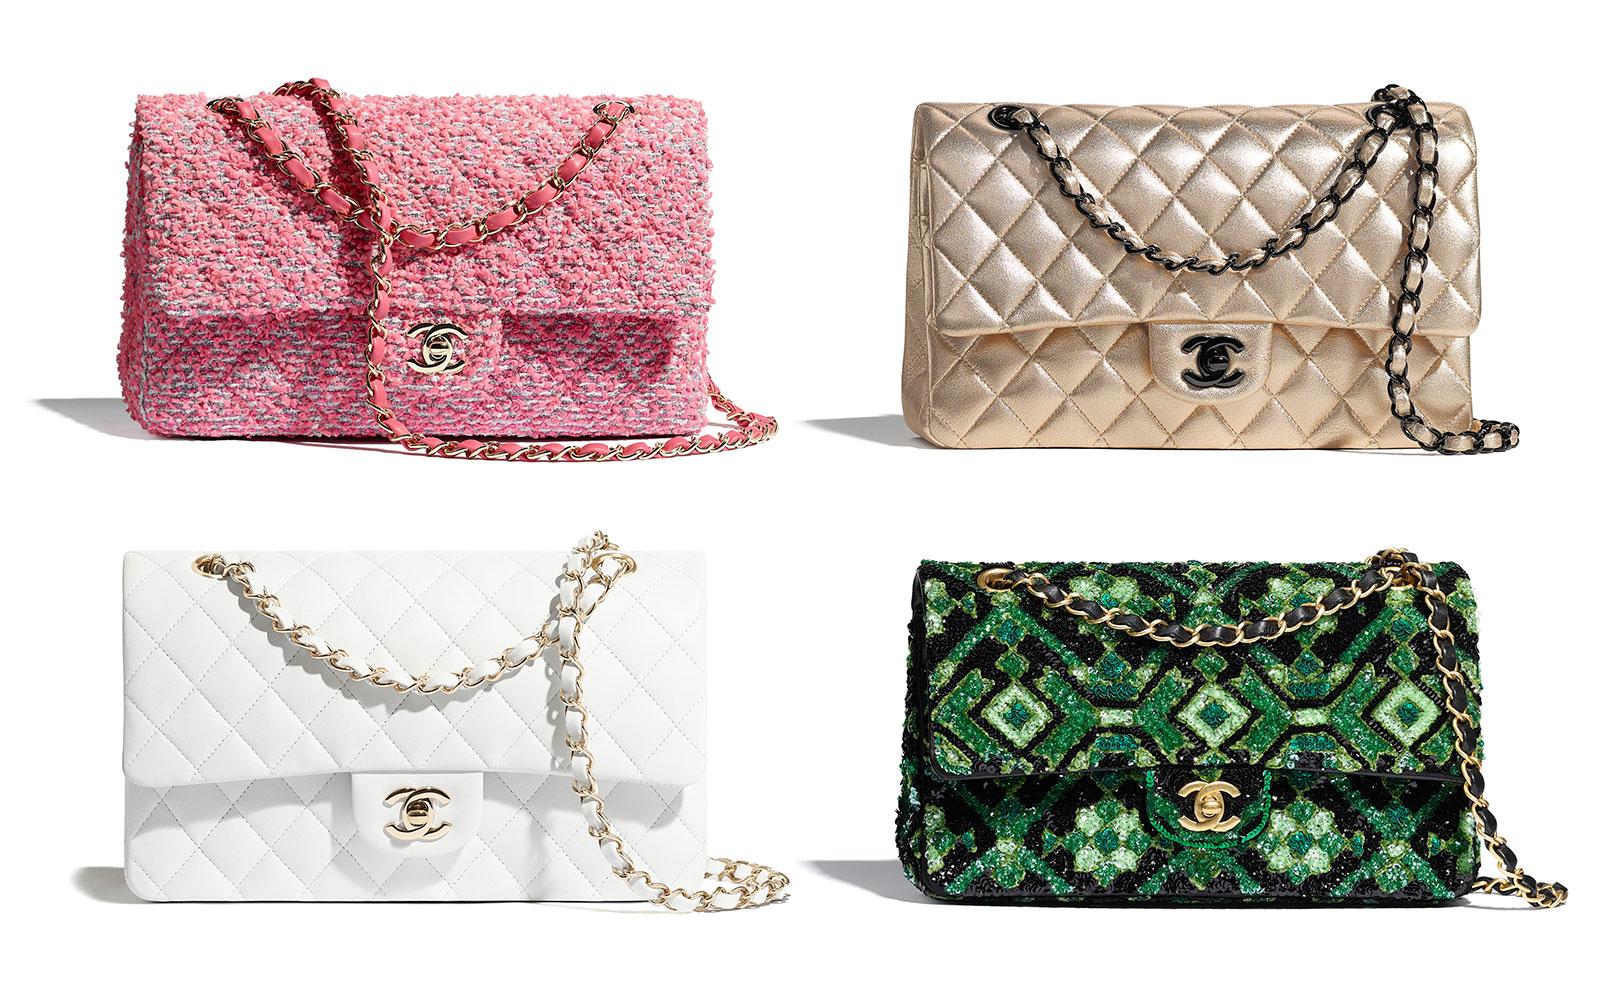 The Lasting Appeal Of The Chanel 1112 Bag